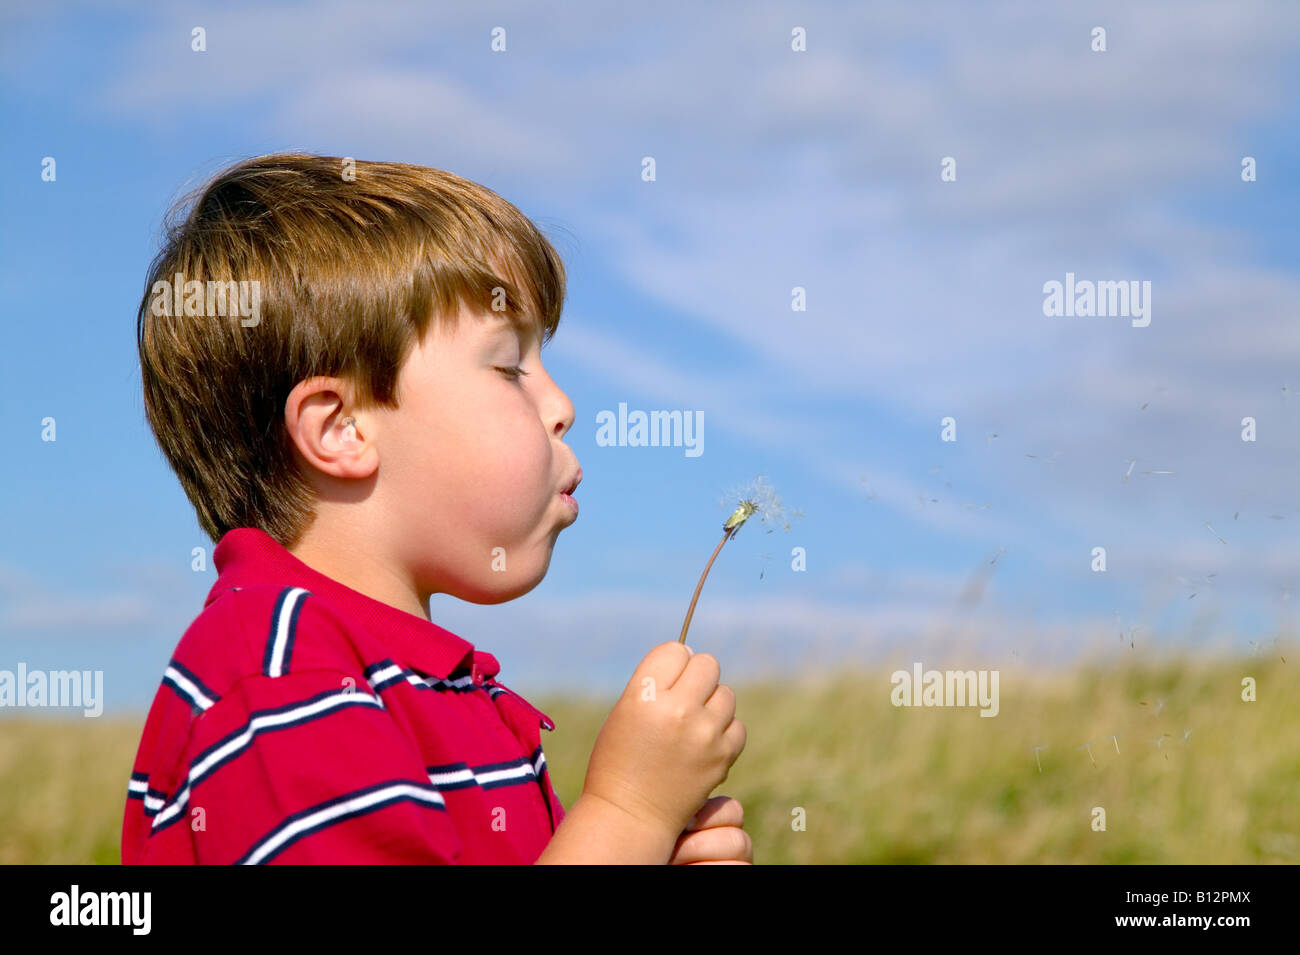 Young boy blowing theseeds from a dandelion head Stock Photo